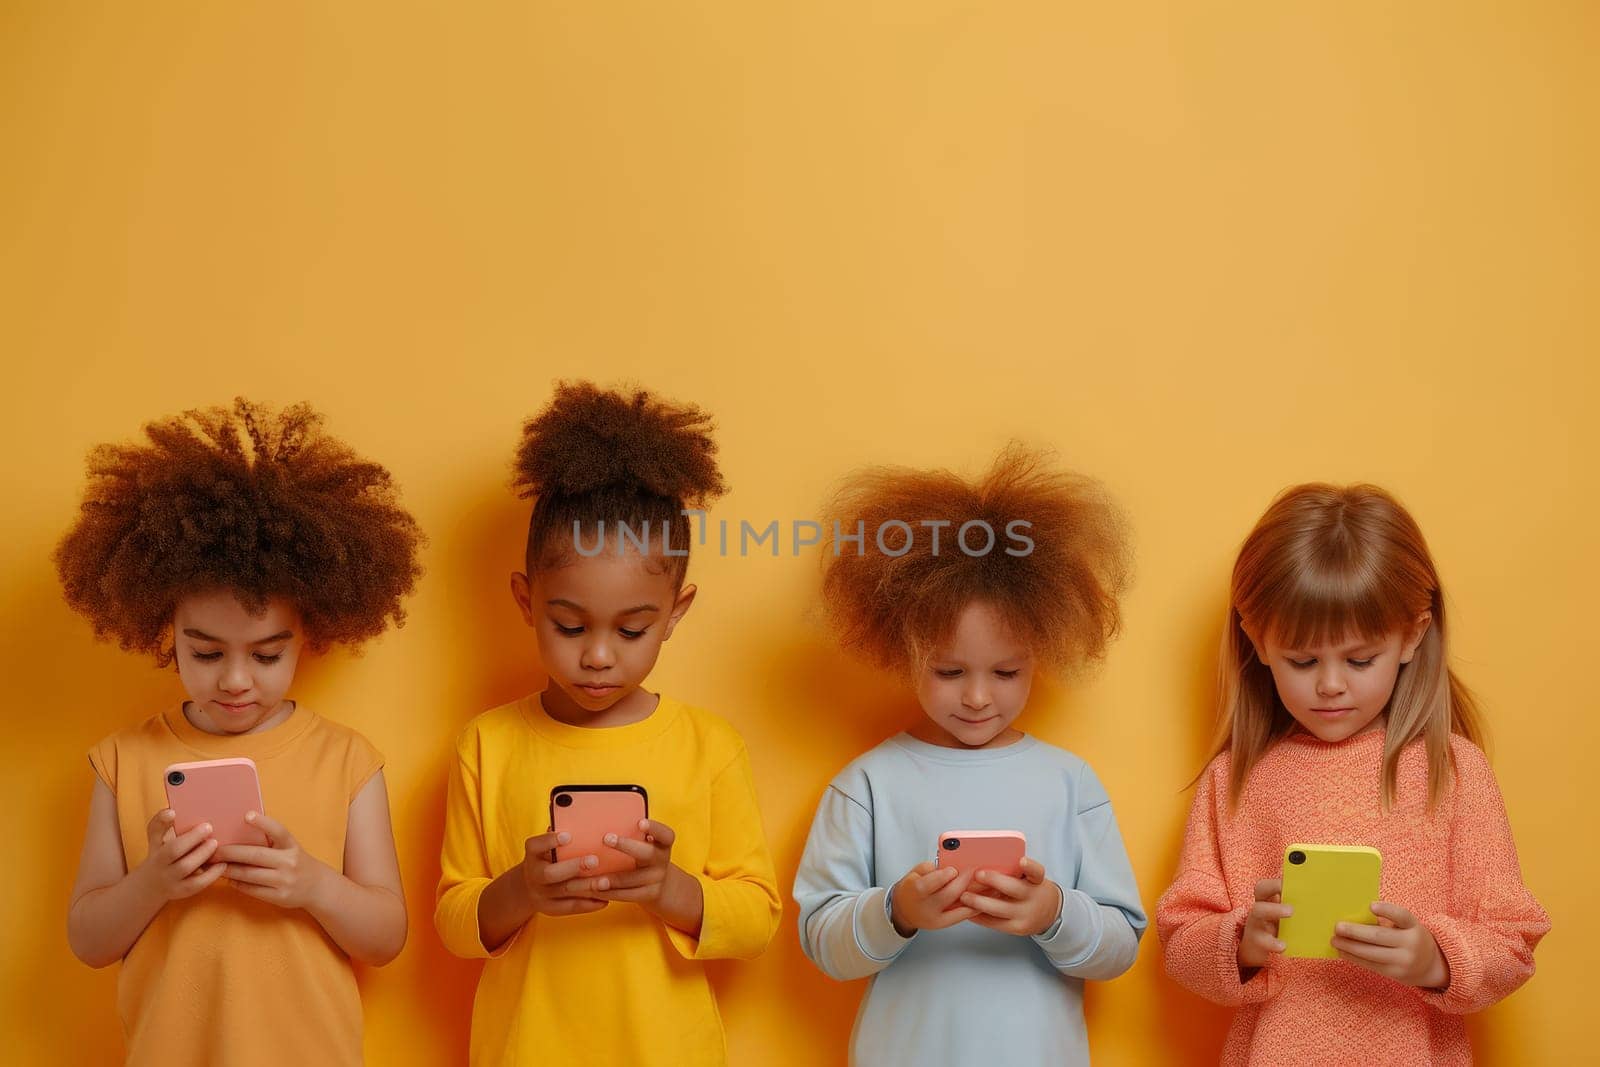 Smartphone addiction group of little children. Kids playing with phone together, Nomophobia.